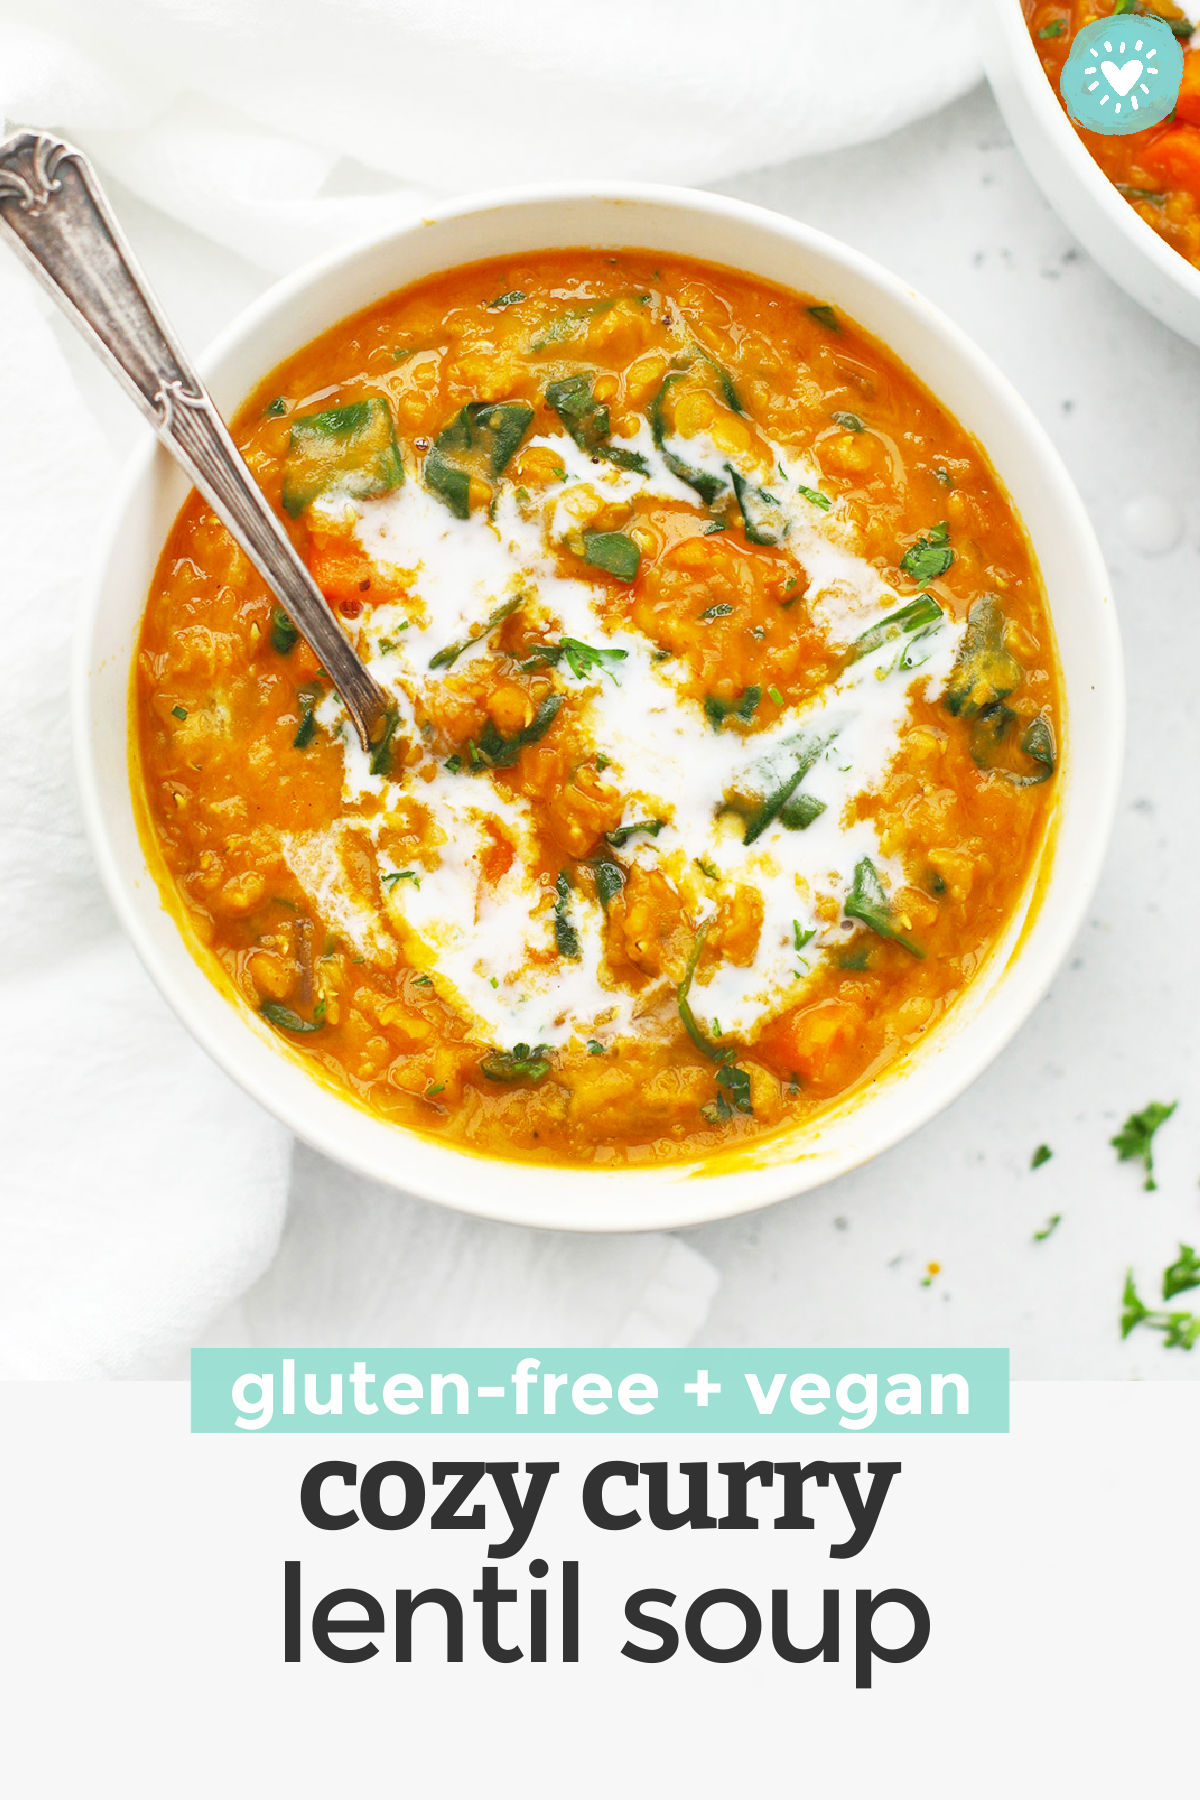 Cozy Curry Lentil Soup - This easy lentil soup recipe is perfect for cold weather and cozy days in. (Vegan, Gluten-Free) // Vegan Lentil Soup // Healthy Lentil Soup // Healthy Soup Recipe // Healthy Lunch // Meal Prep Lunch #lentilsoup #healthysoup #healthylunch #vegan #glutenfree